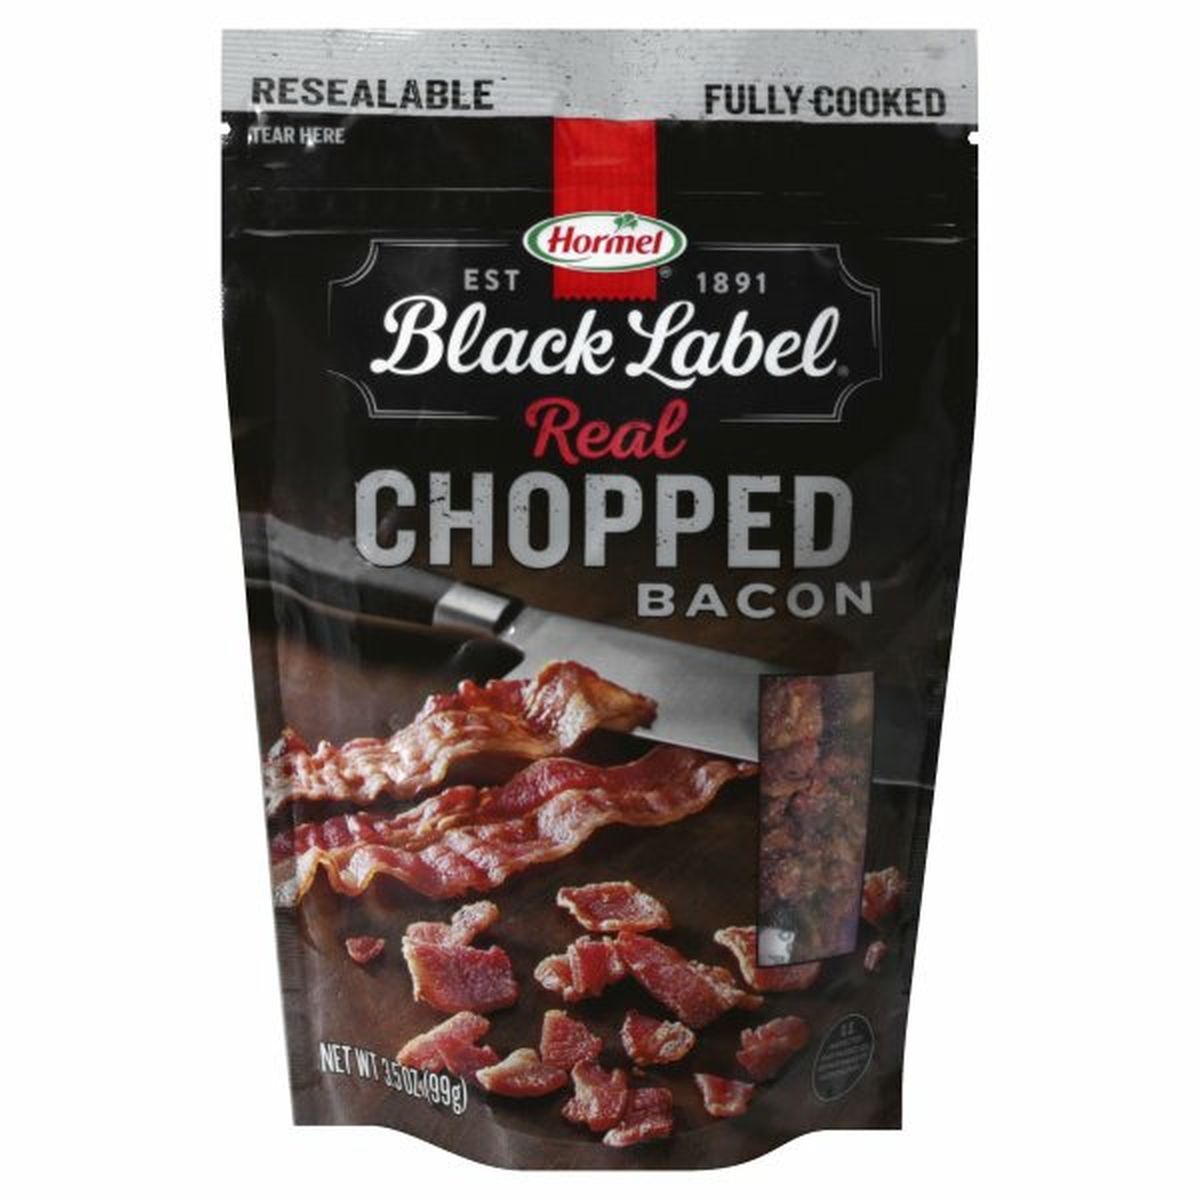 Calories in Black Label Bacon, Chopped